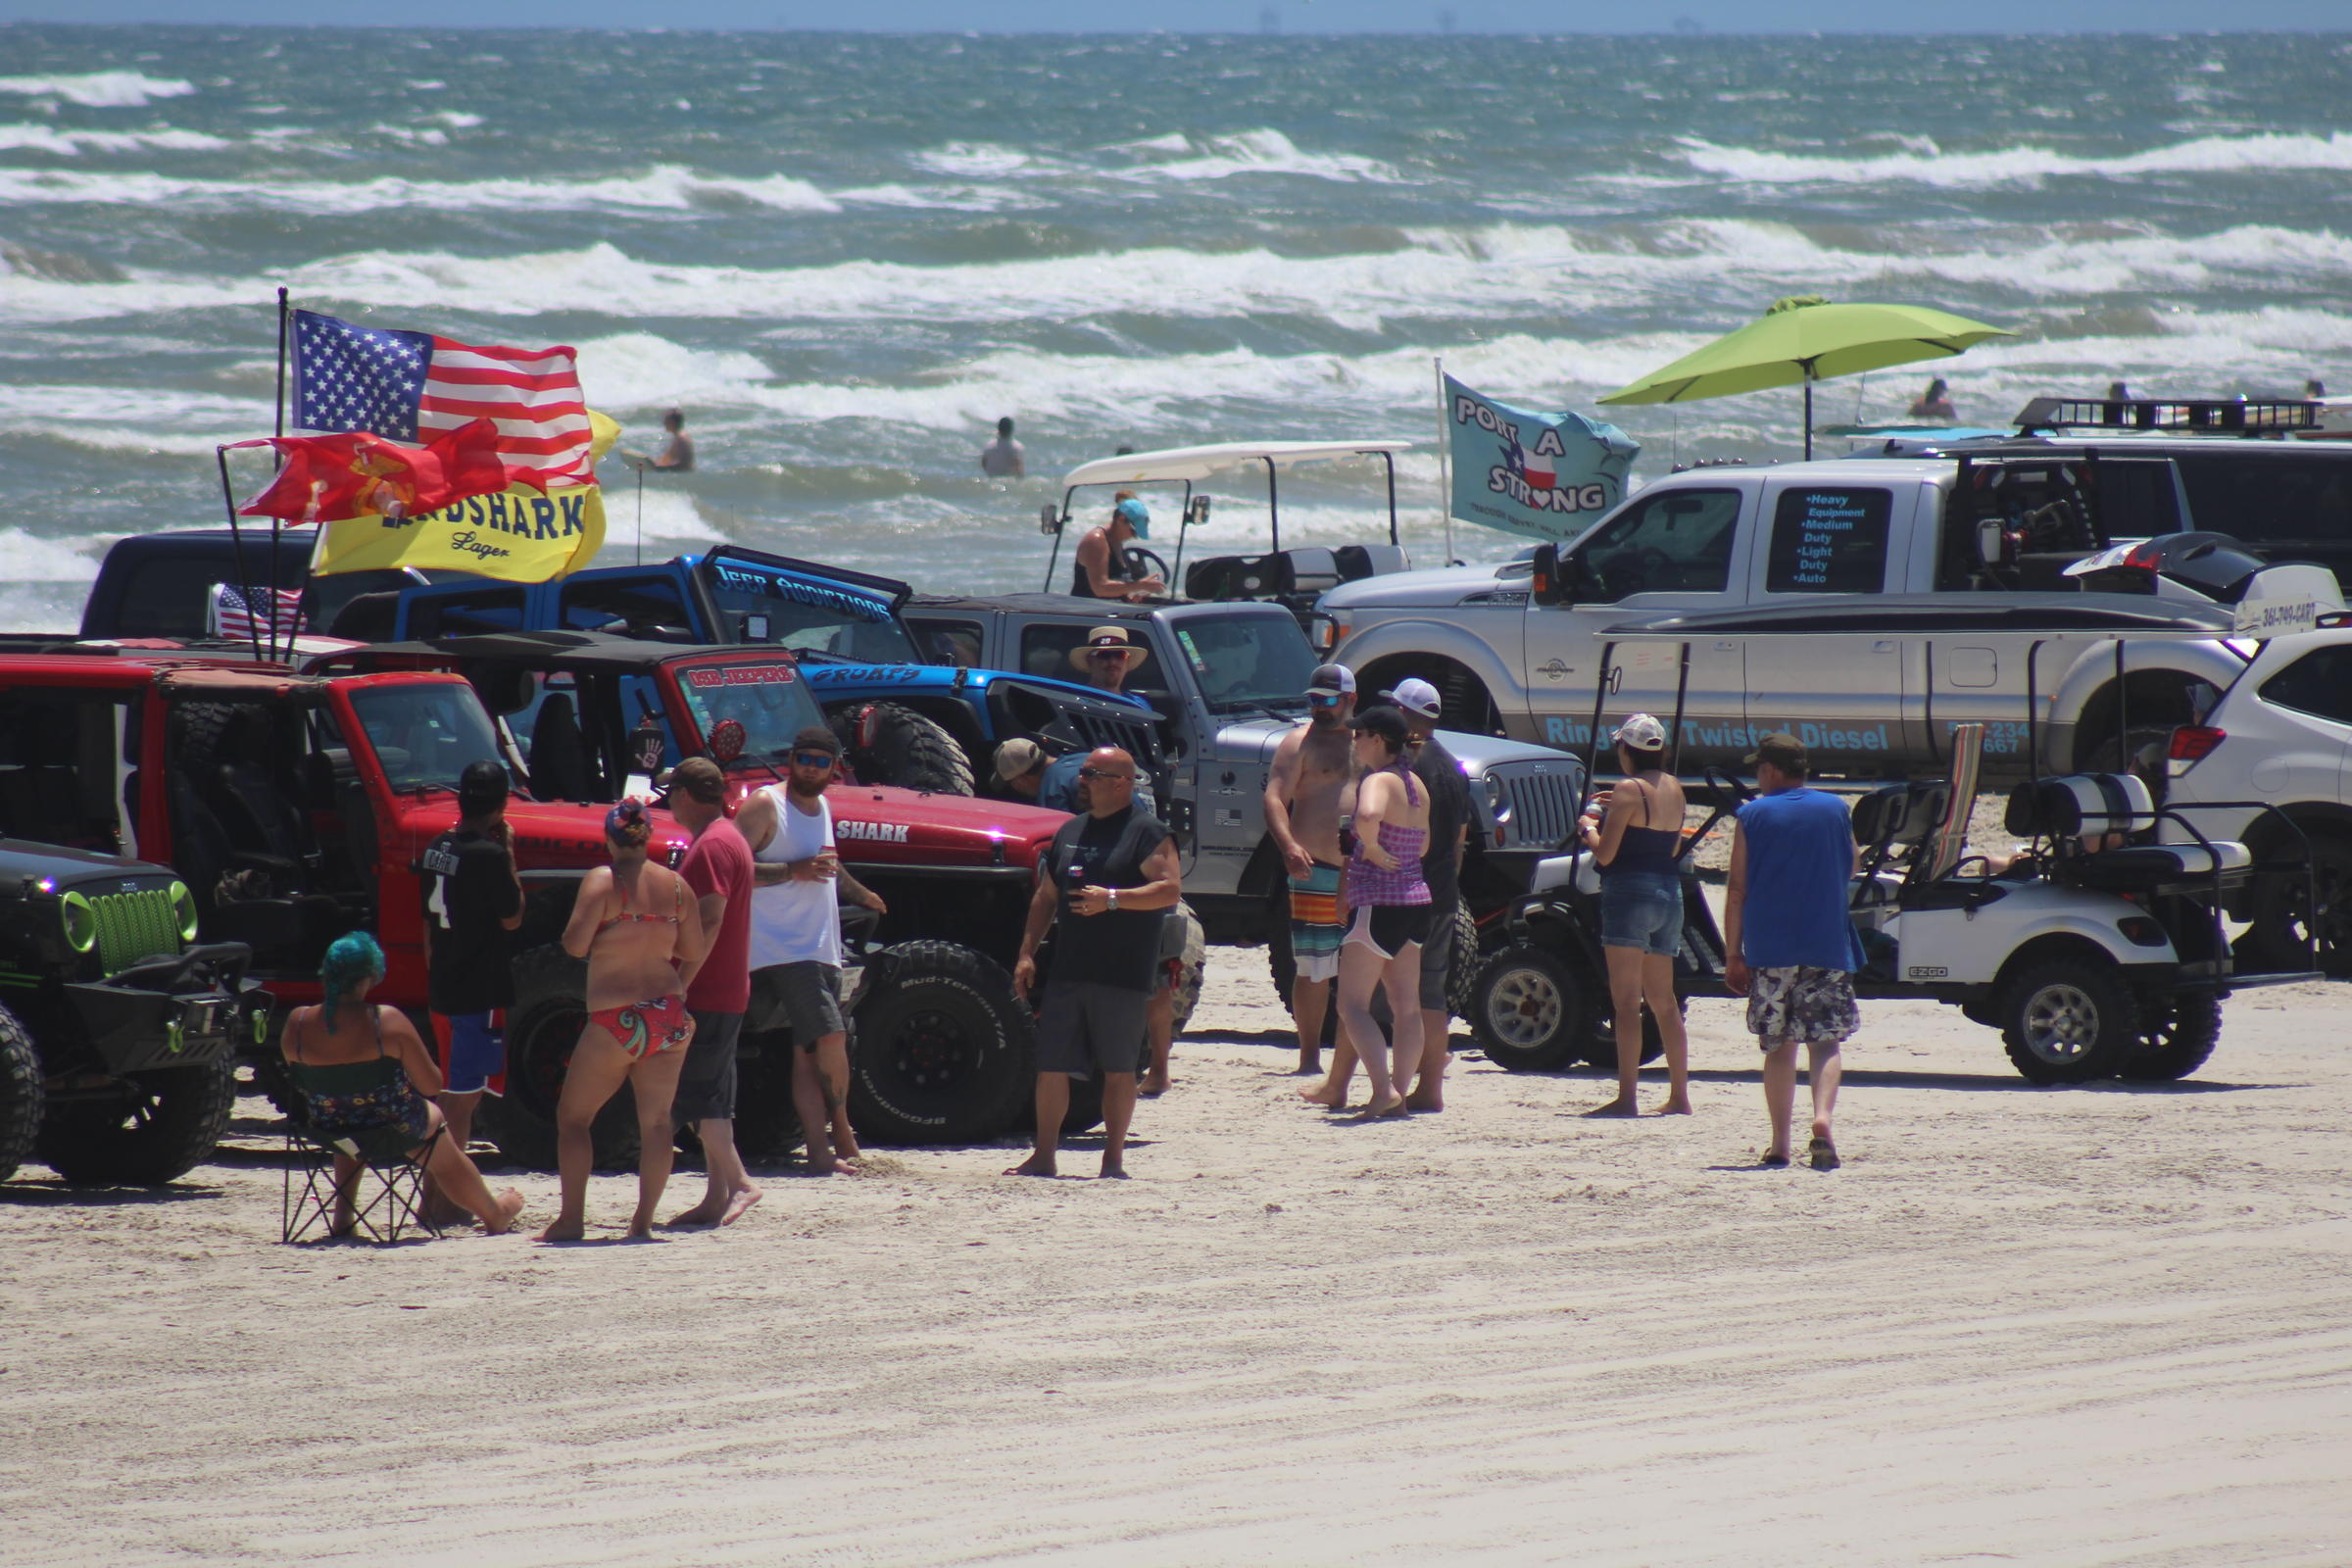 Best Way To Port Aransas From Austin The W Guide